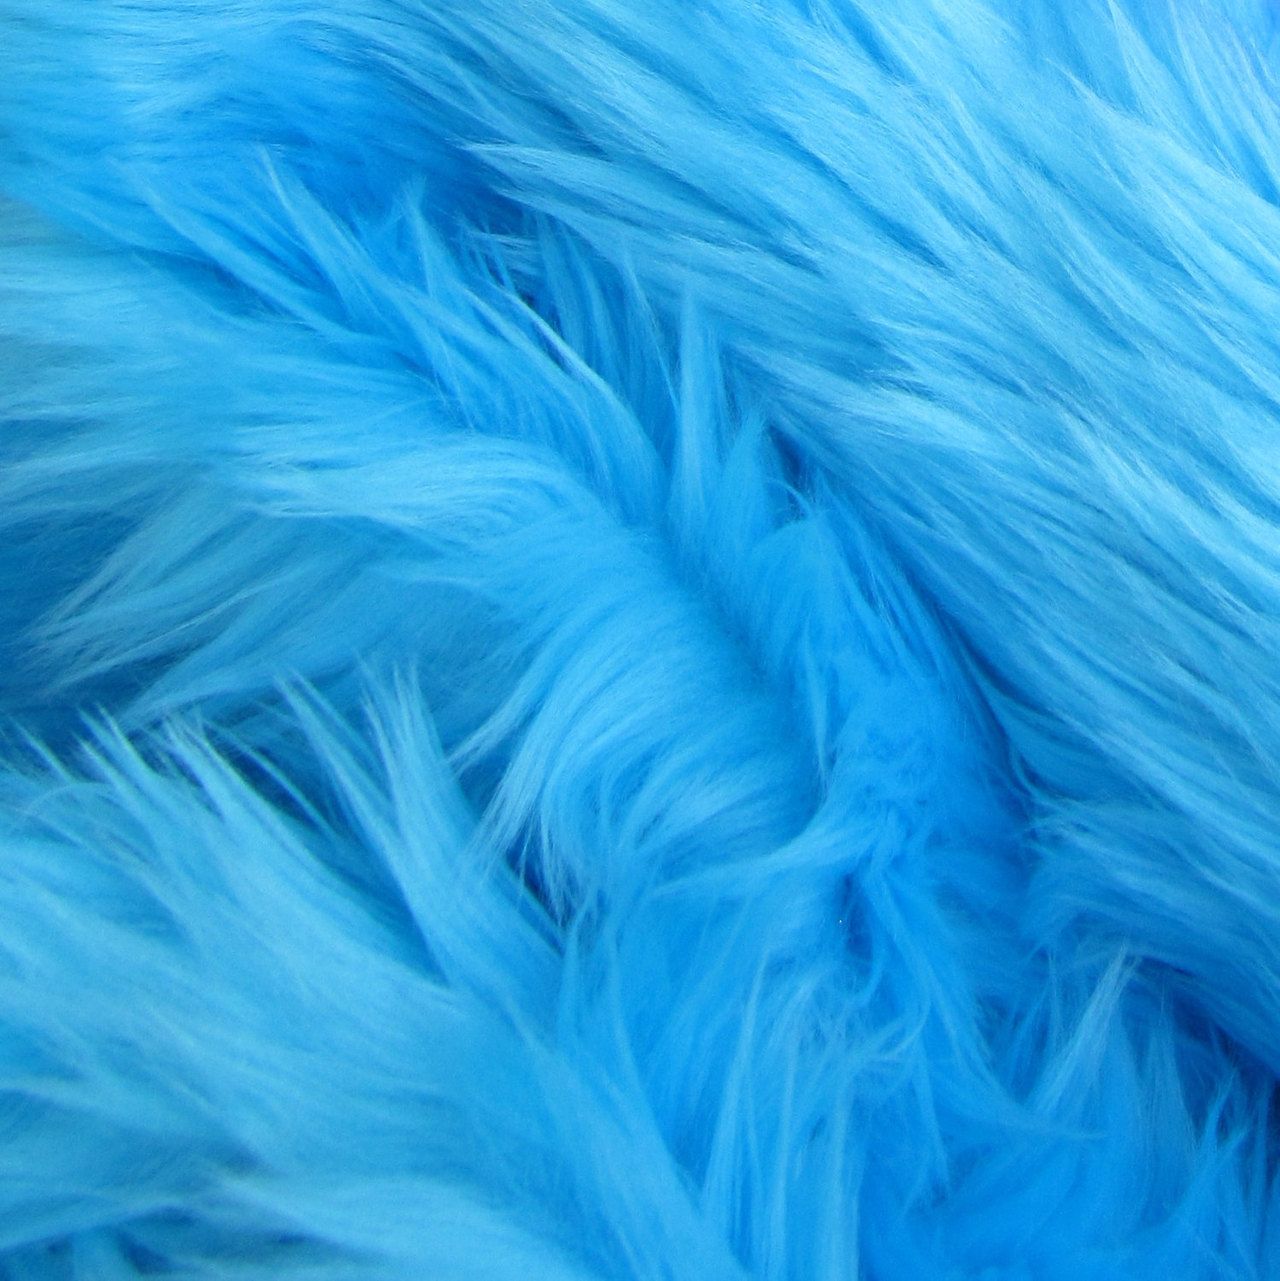 Blue Fur Wallpaper Blue Feather Turquoise Fur Teal 696090 Wallpaperuse